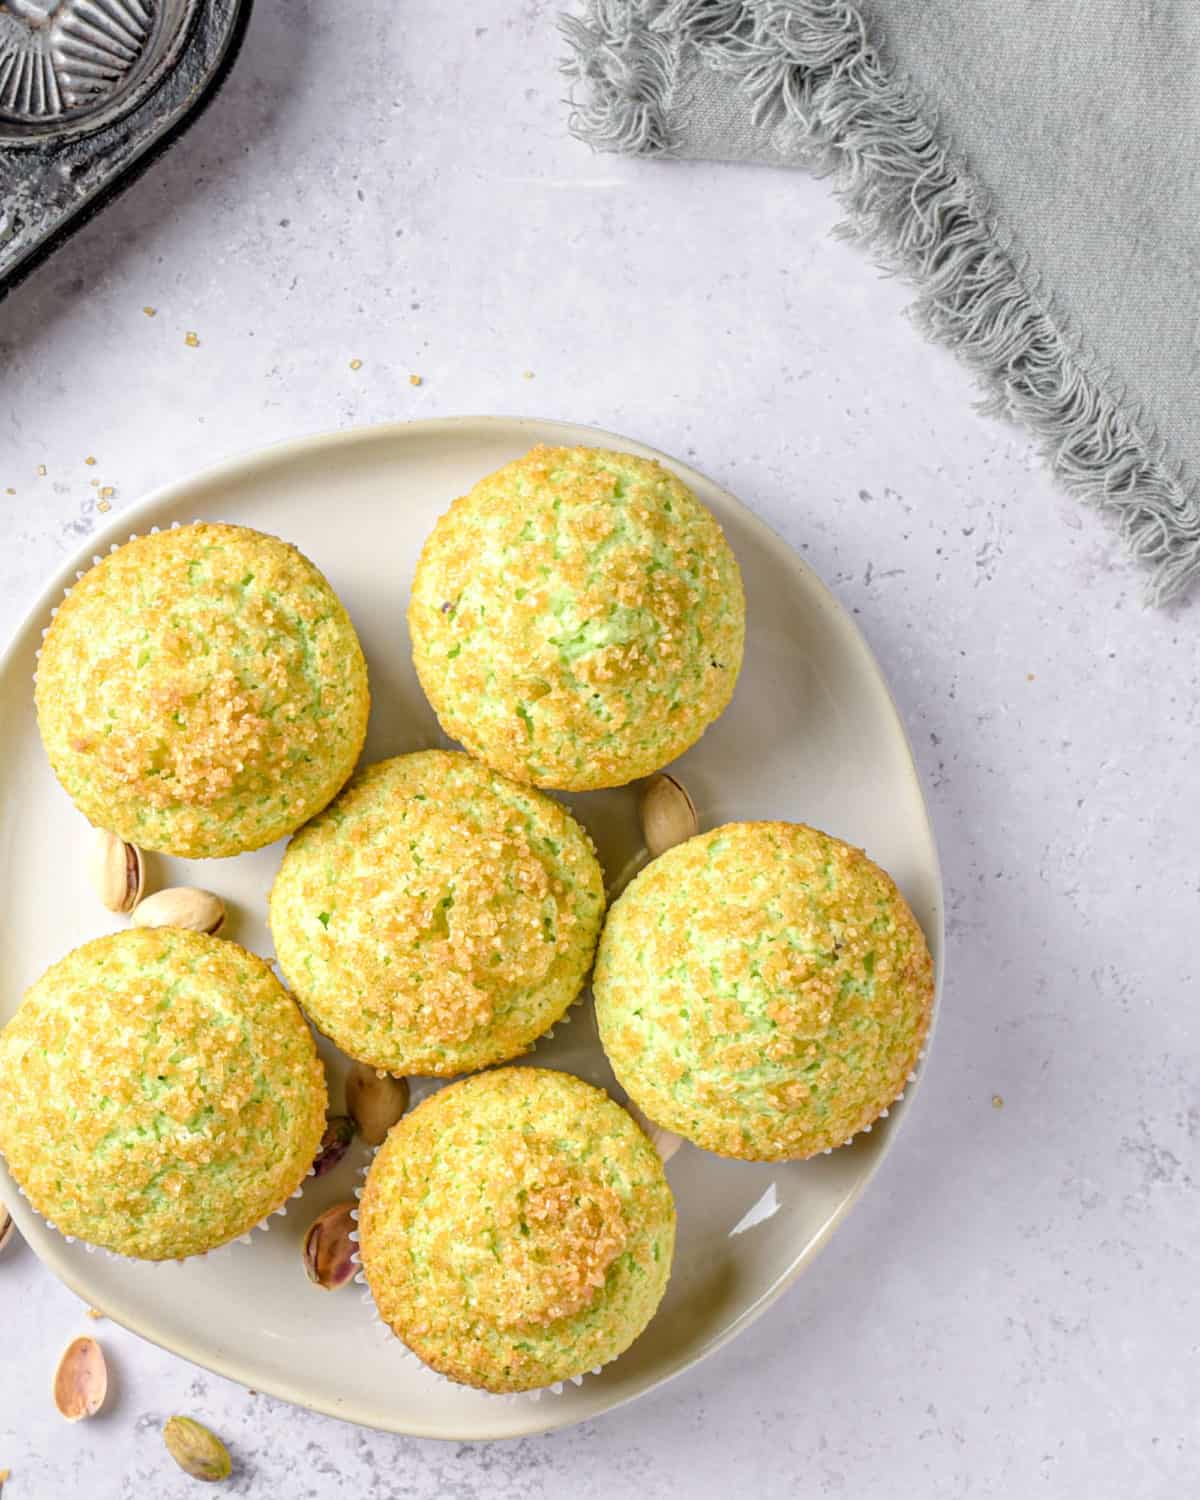 Green muffins on a white plate ready to be served.